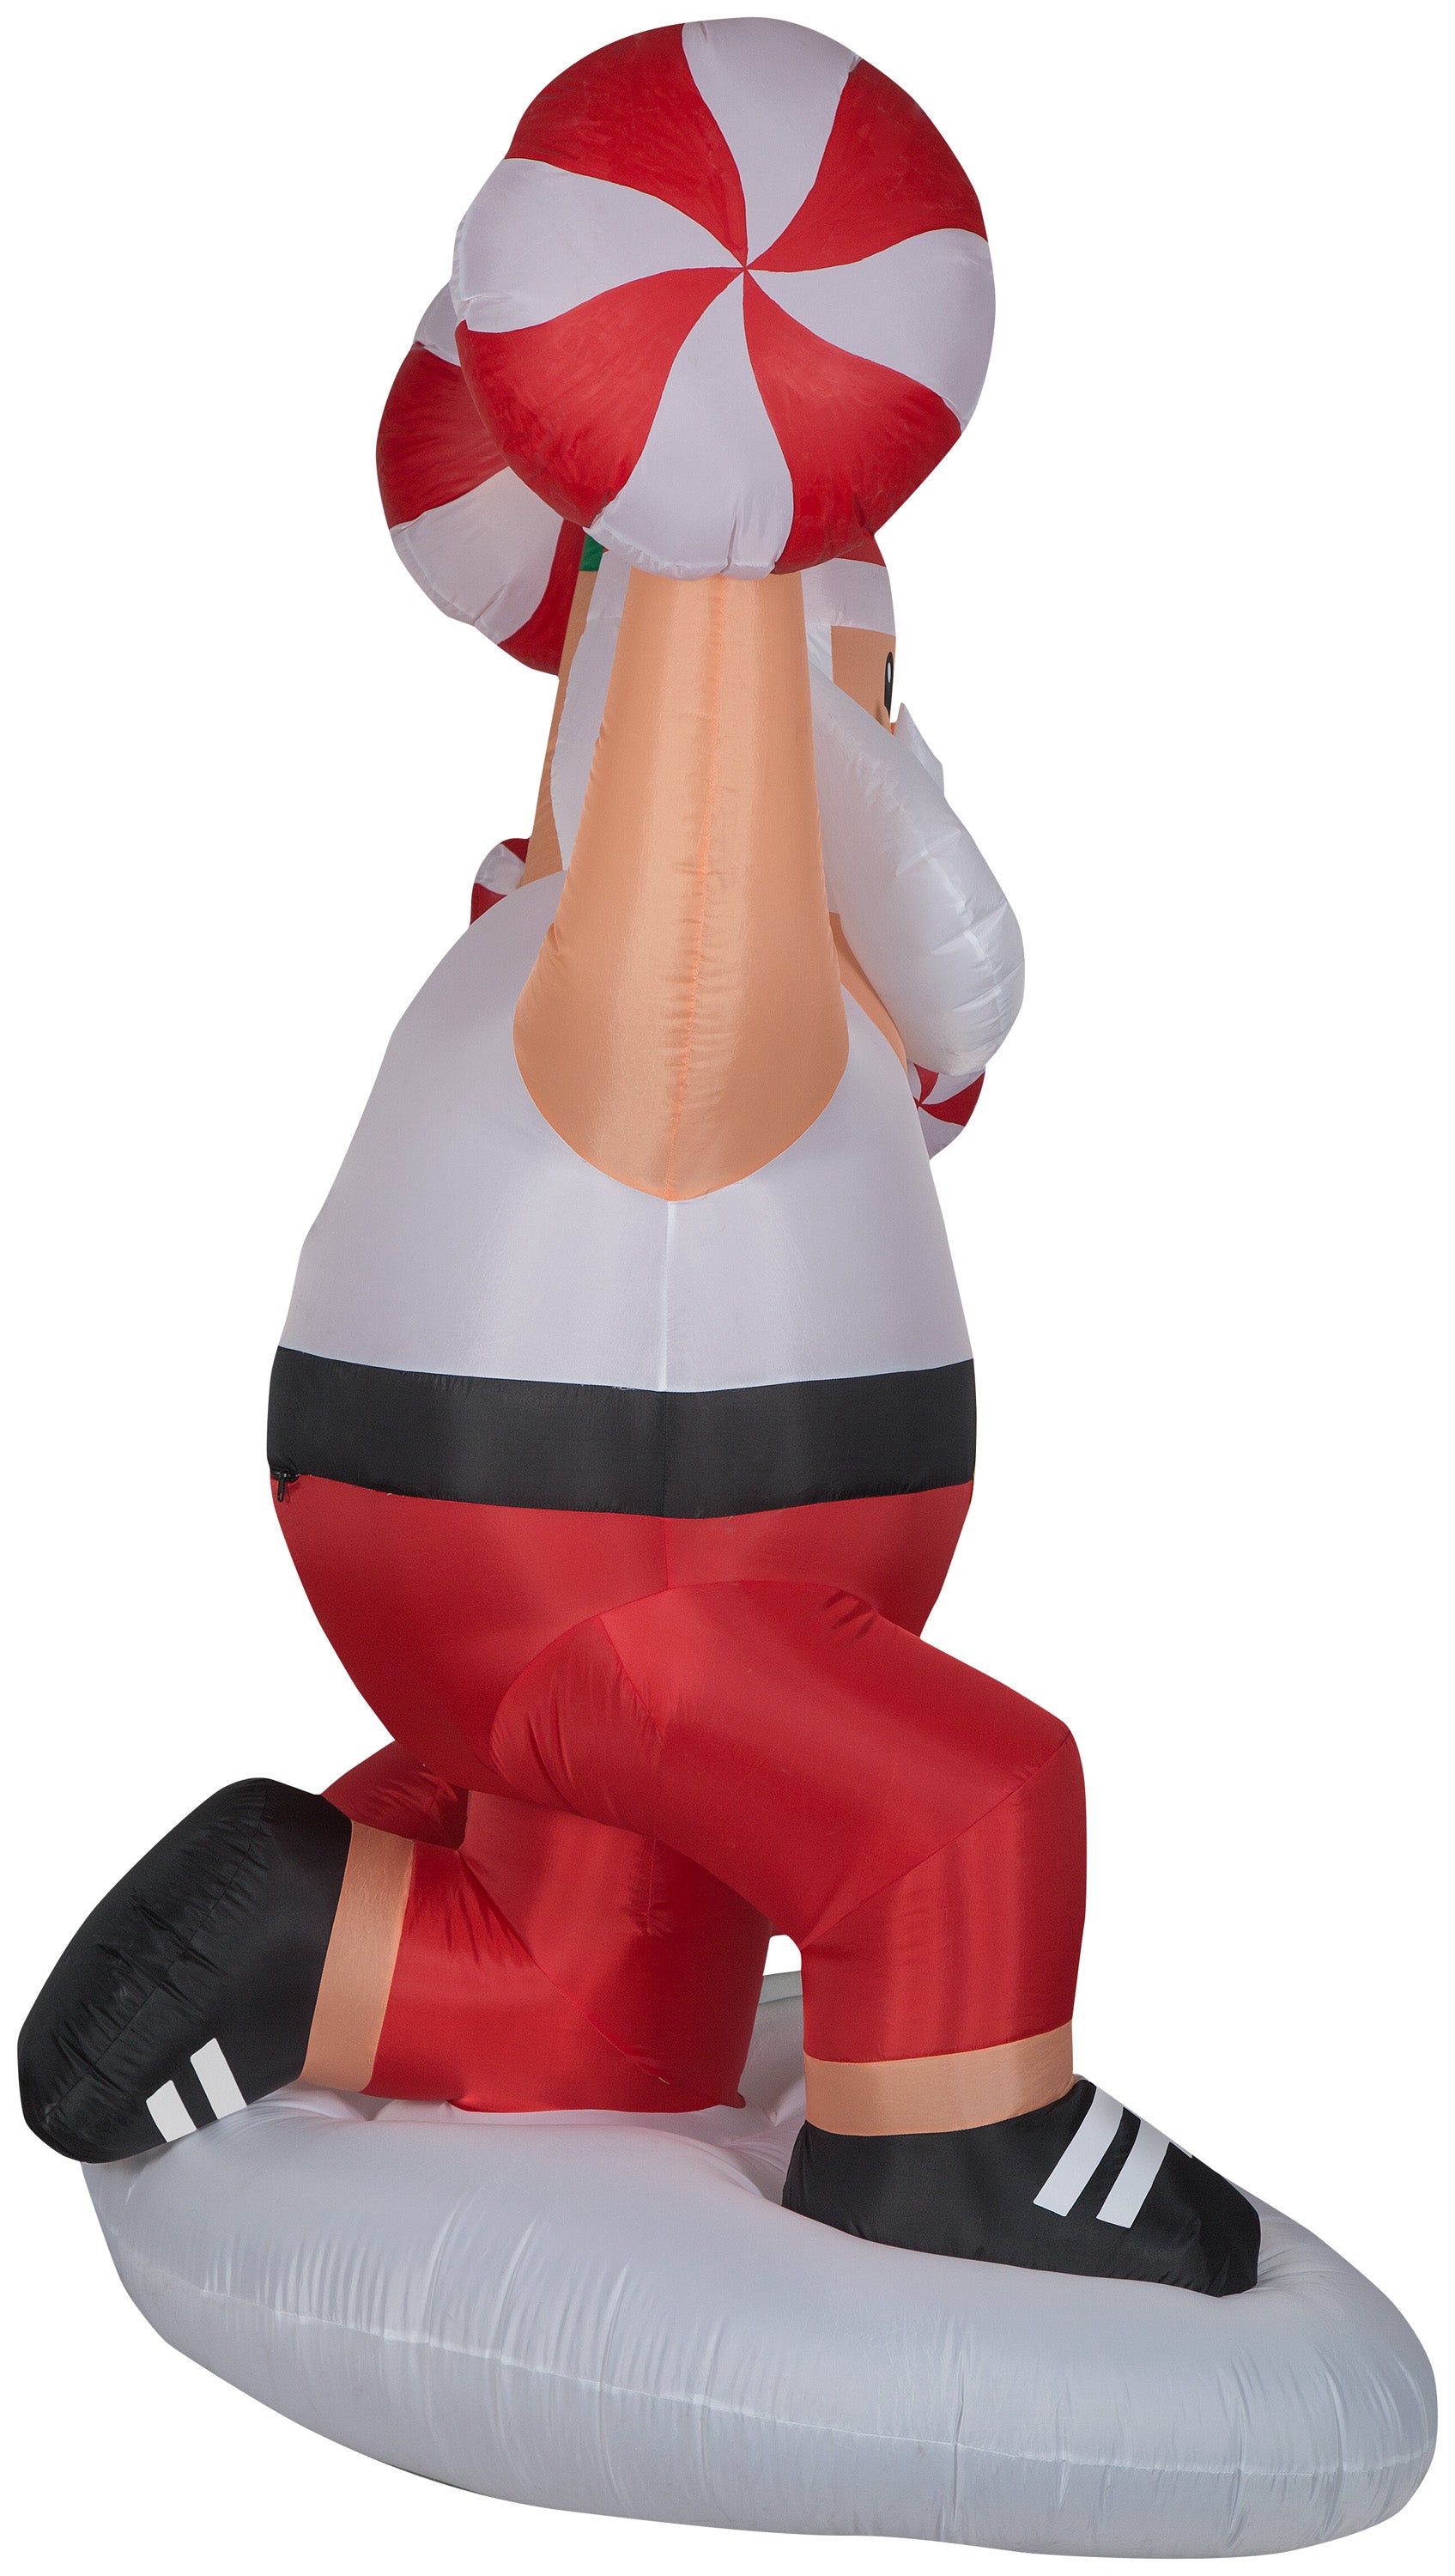 Gemmy Christmas Airblown Inflatable Santa and Mrs Claus Workout Scene, 6.5 ft Tall, Red